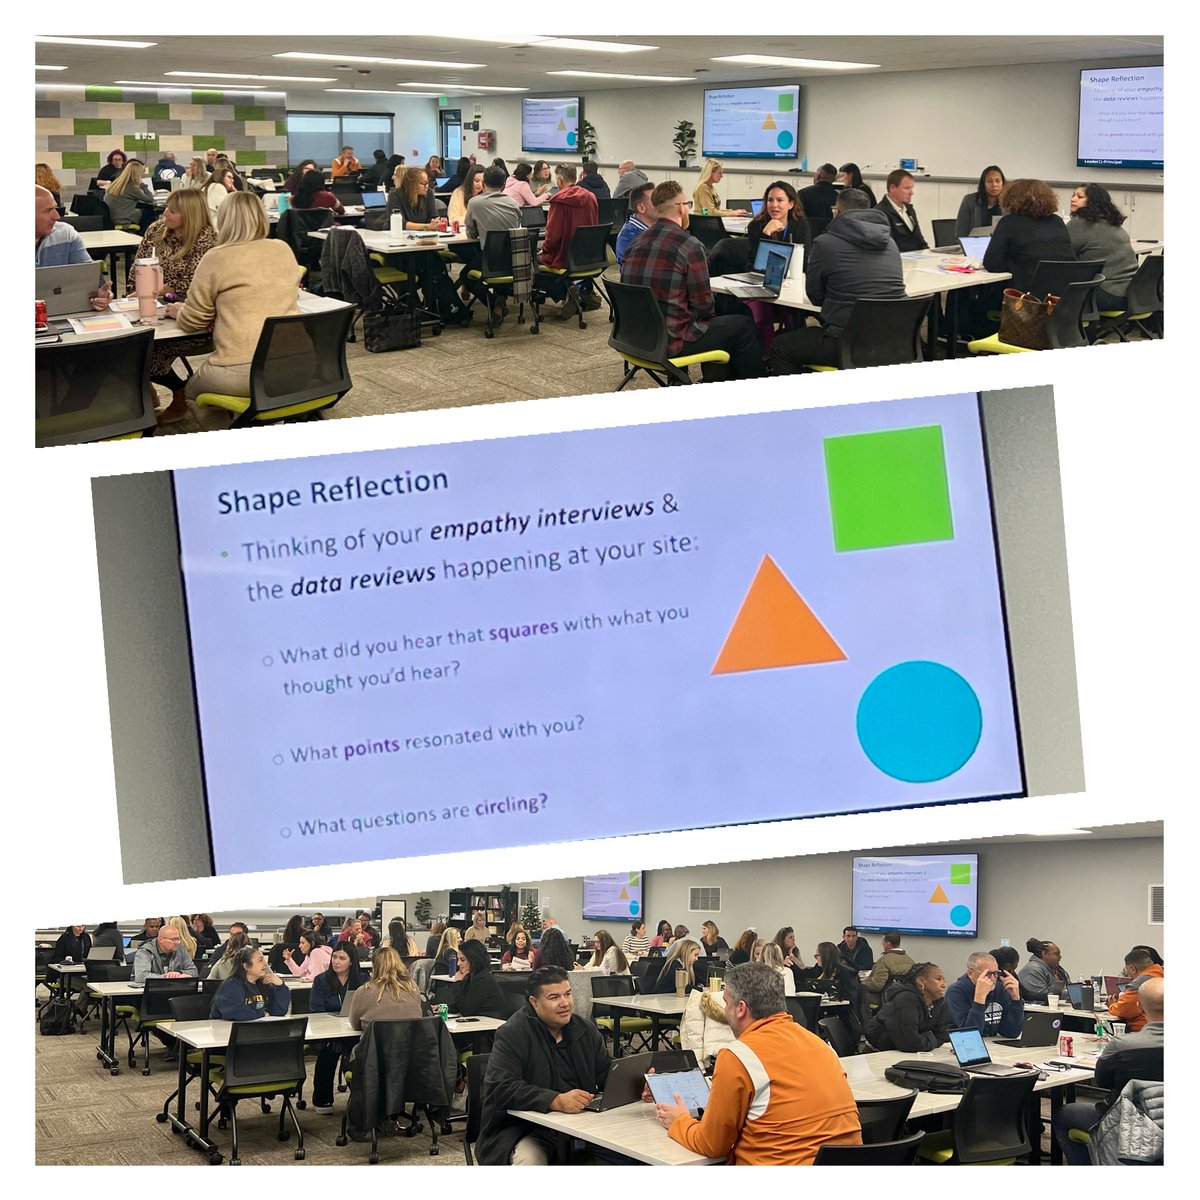 Year 3 of Leader21.Principal professional learning at @ValVerdeUSD has been so much fun! Chief Learning Officer @DrShannonKing was on-site today having great conversations about authentic assessment! This work supports building-level leader capacity. #PortraitToPractice